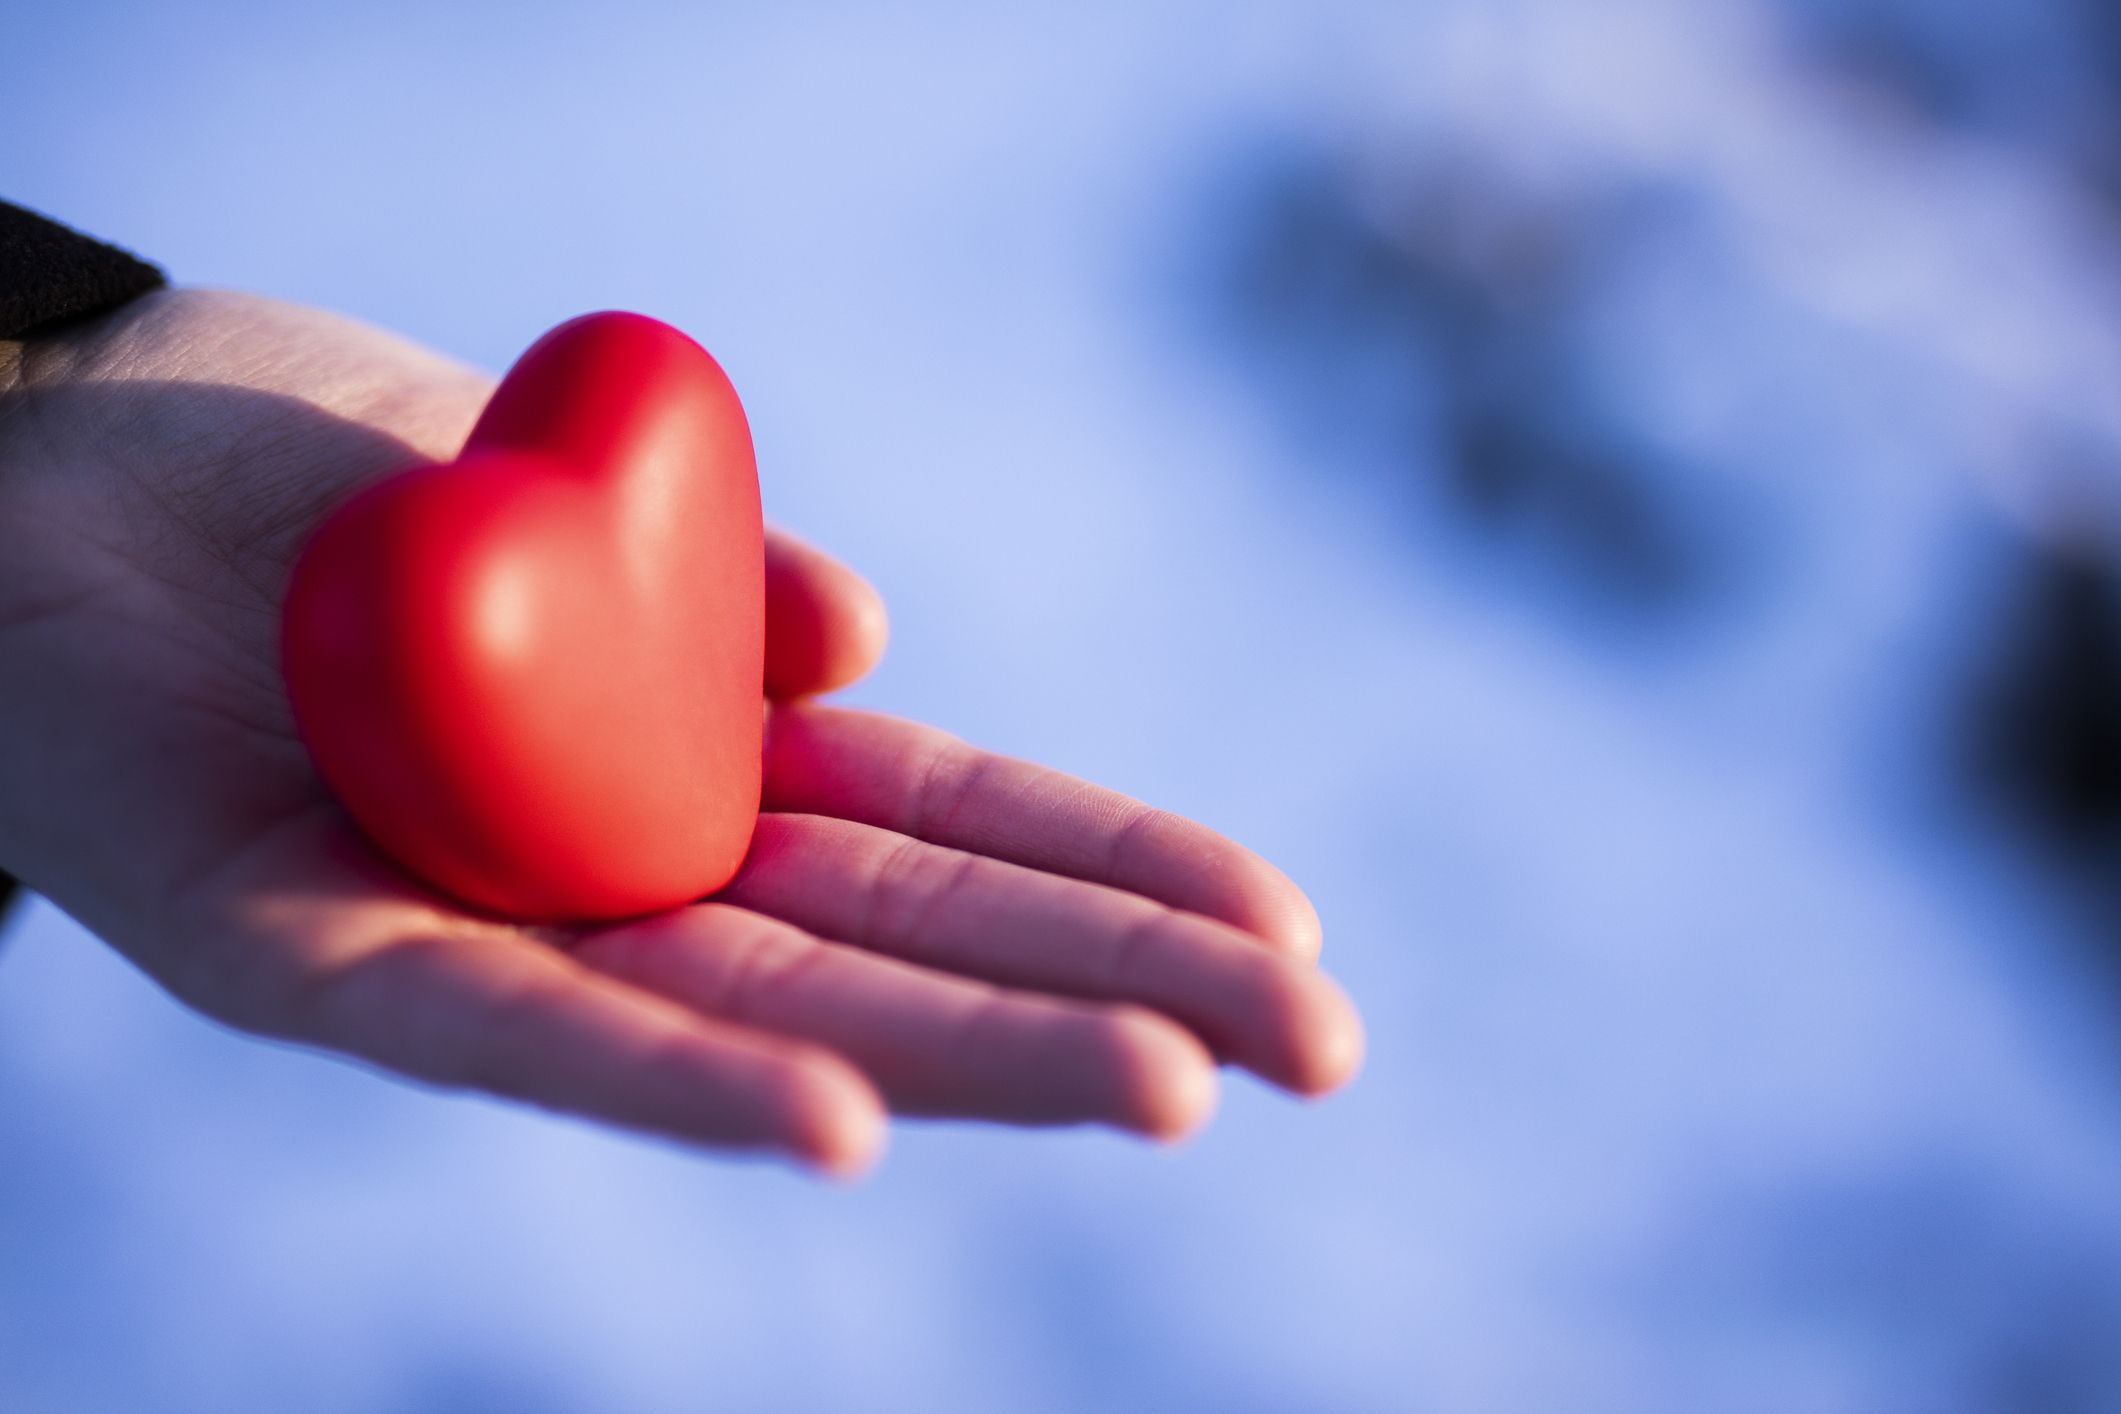 Compassionate empathy extends our heart to uplift others